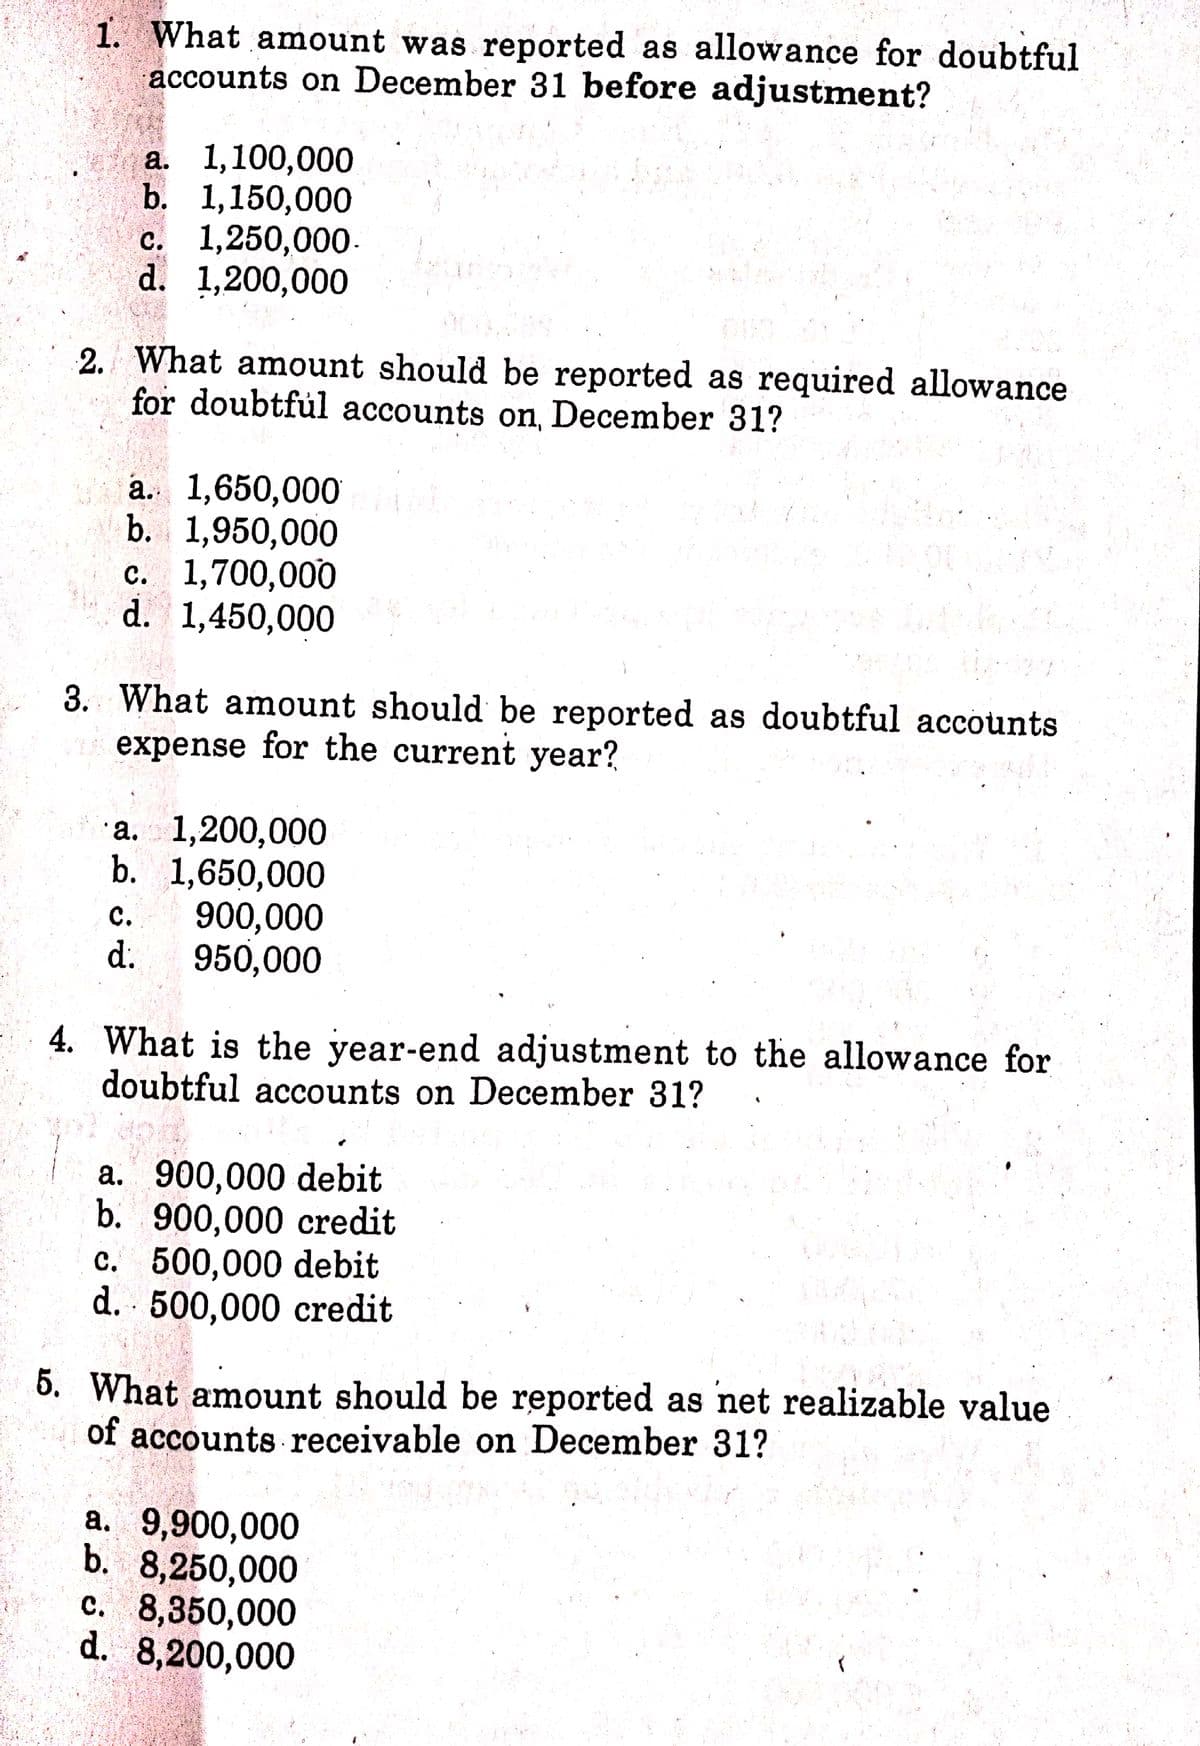 1. What amount was reported as allowance for doubtful
accounts on December 31 before adjustment?
а. 1,100,000
b. 1,150,000
с. 1,250,000.
d. 1,200,000
00
2. What amount should be reported as required allowance
for doubtful accounts on, December 31?
a. 1,650,000i
b. 1,950,000
с. 1,700,000
d. 1,450,000
3. What amount should be reported as doubtful accounts
expense for the current year?
a. 1,200,000
b. 1,650,000
900,000
d.
с.
950,000
4. What is the year-end adjustment to the allowance for
doubtful accounts on December 31?
a. 900,000 debit
b. 900,000 credit
C. 500,000 debit
d. 500,000 credit
5. What amount should be reported as net realizable value
of accounts receivable on December 31?
a. 9,900,000
b. 8,250,000
c. 8,350,000
d. 8,200,000
